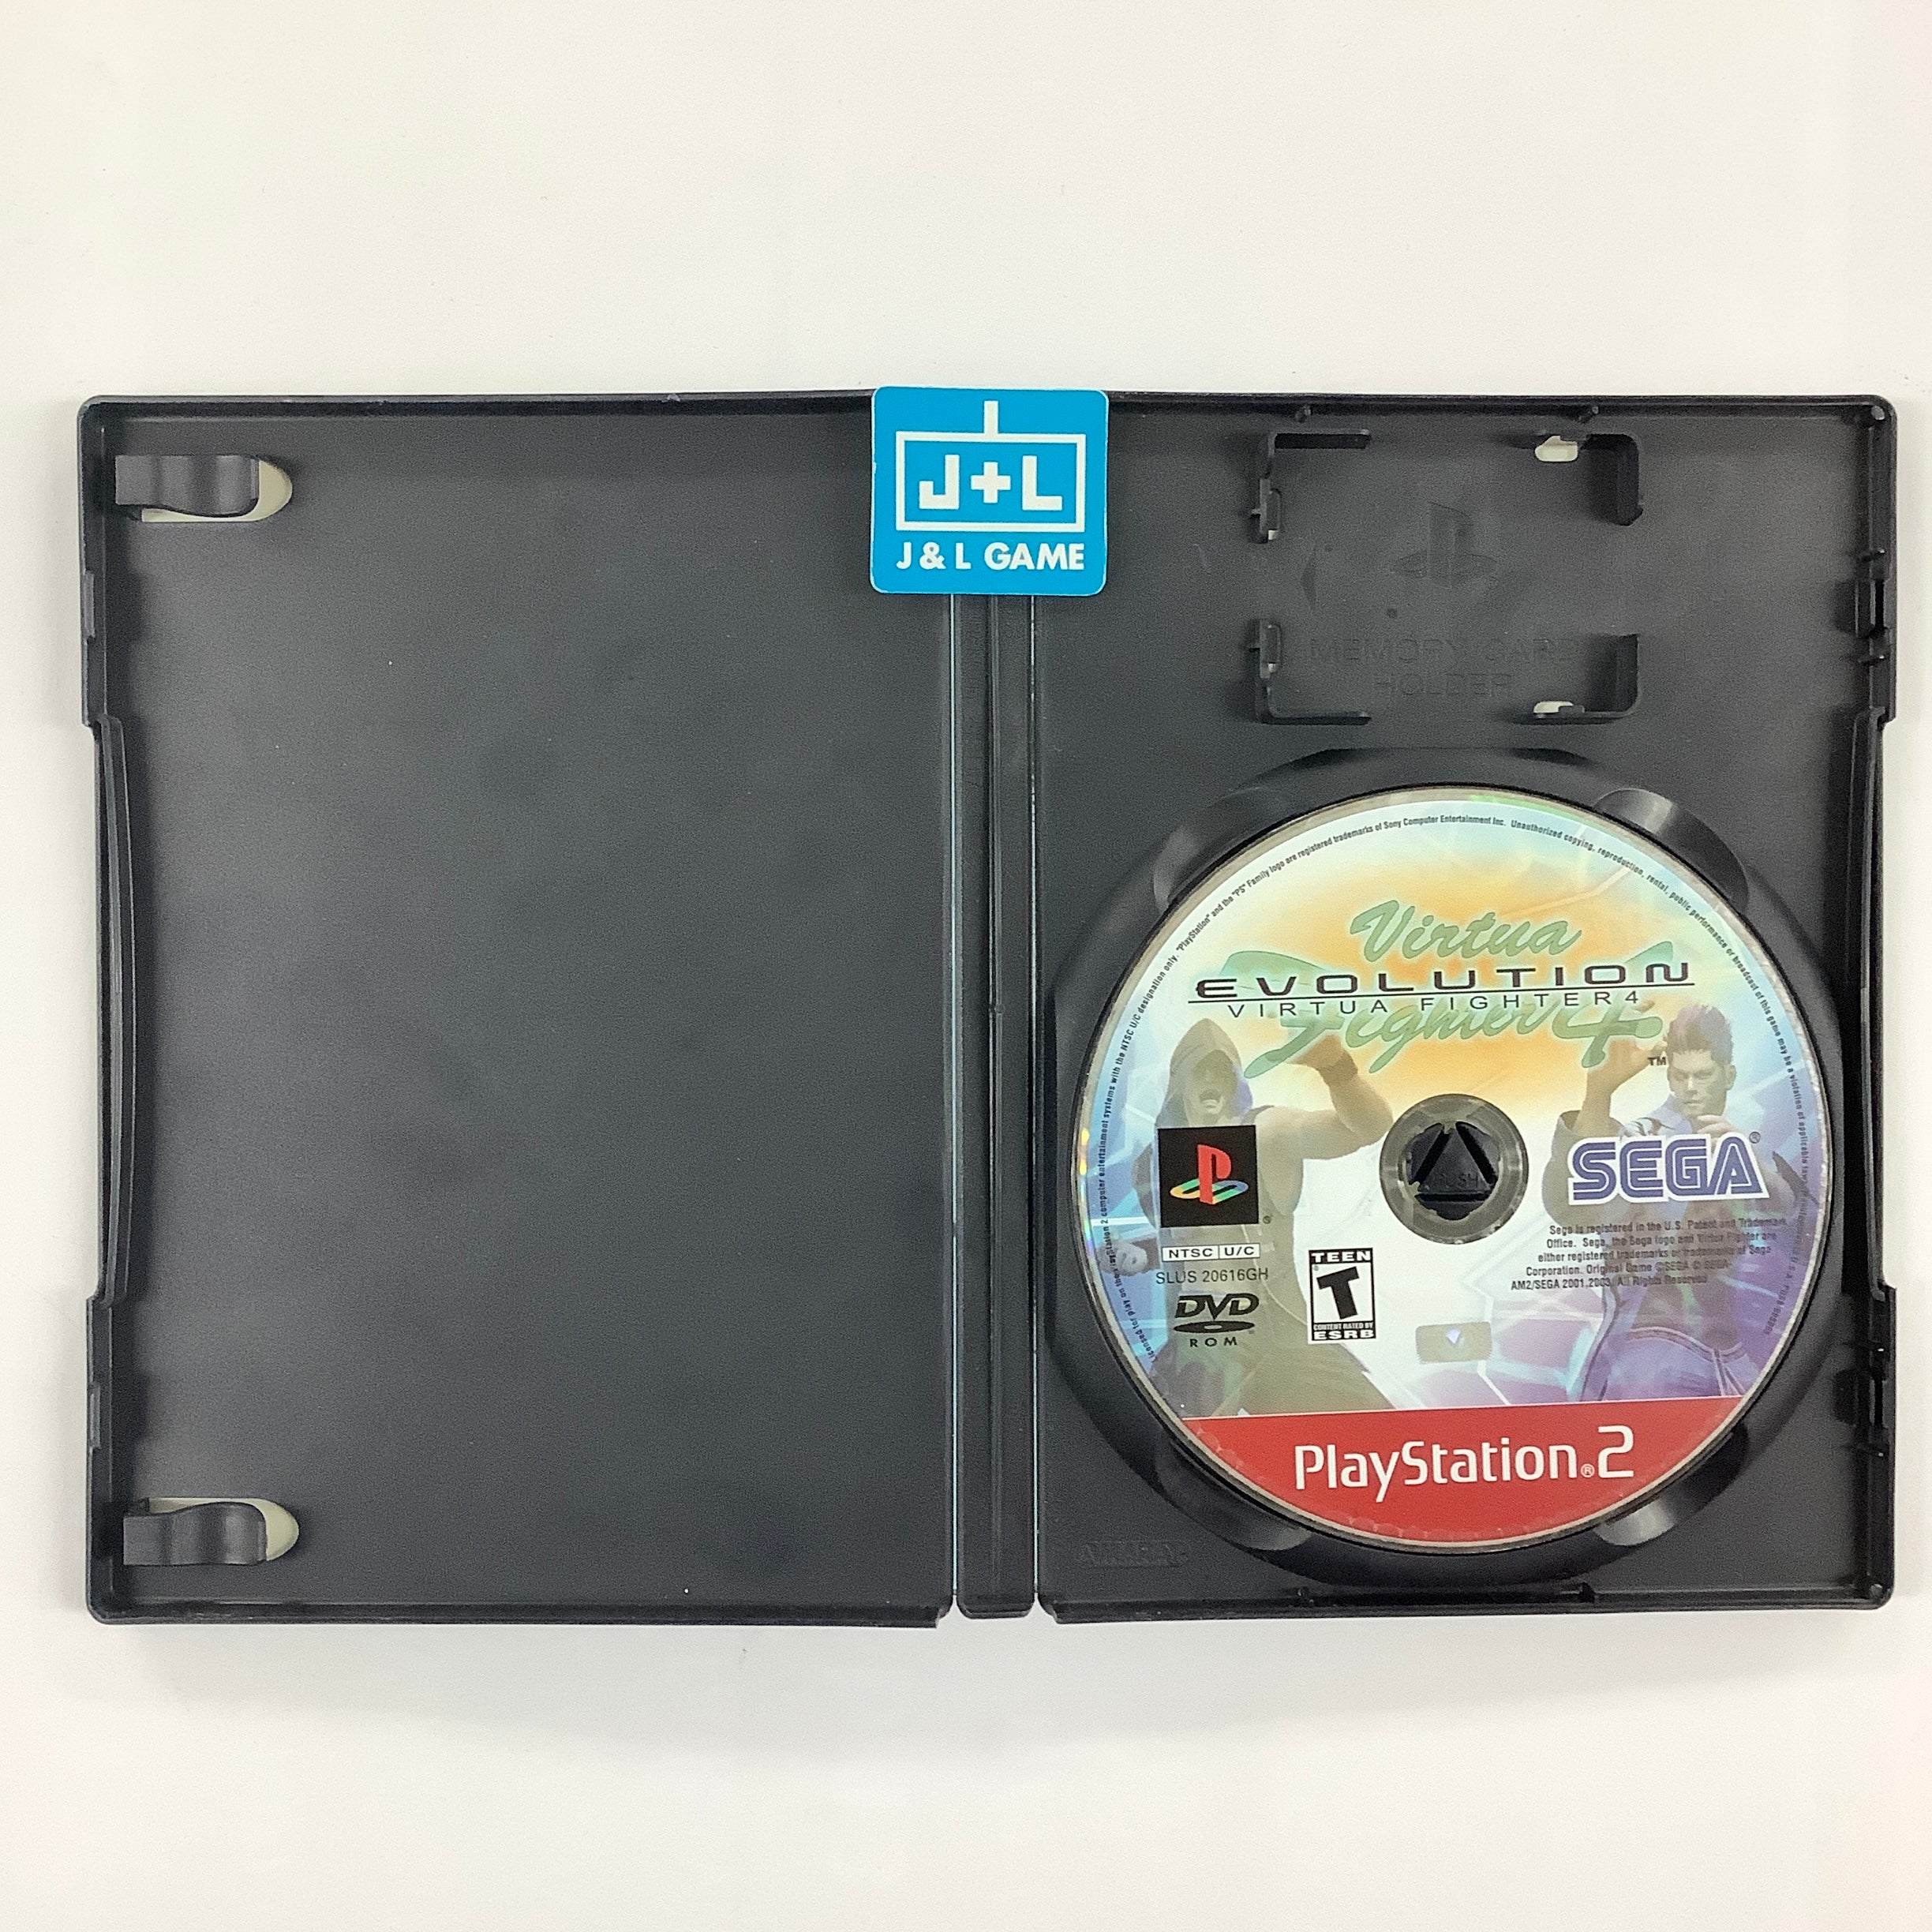 Virtua Fighter 4: Evolution (Greatest Hits) - (PS2) PlayStation 2 [Pre-Owned] Video Games Sega   